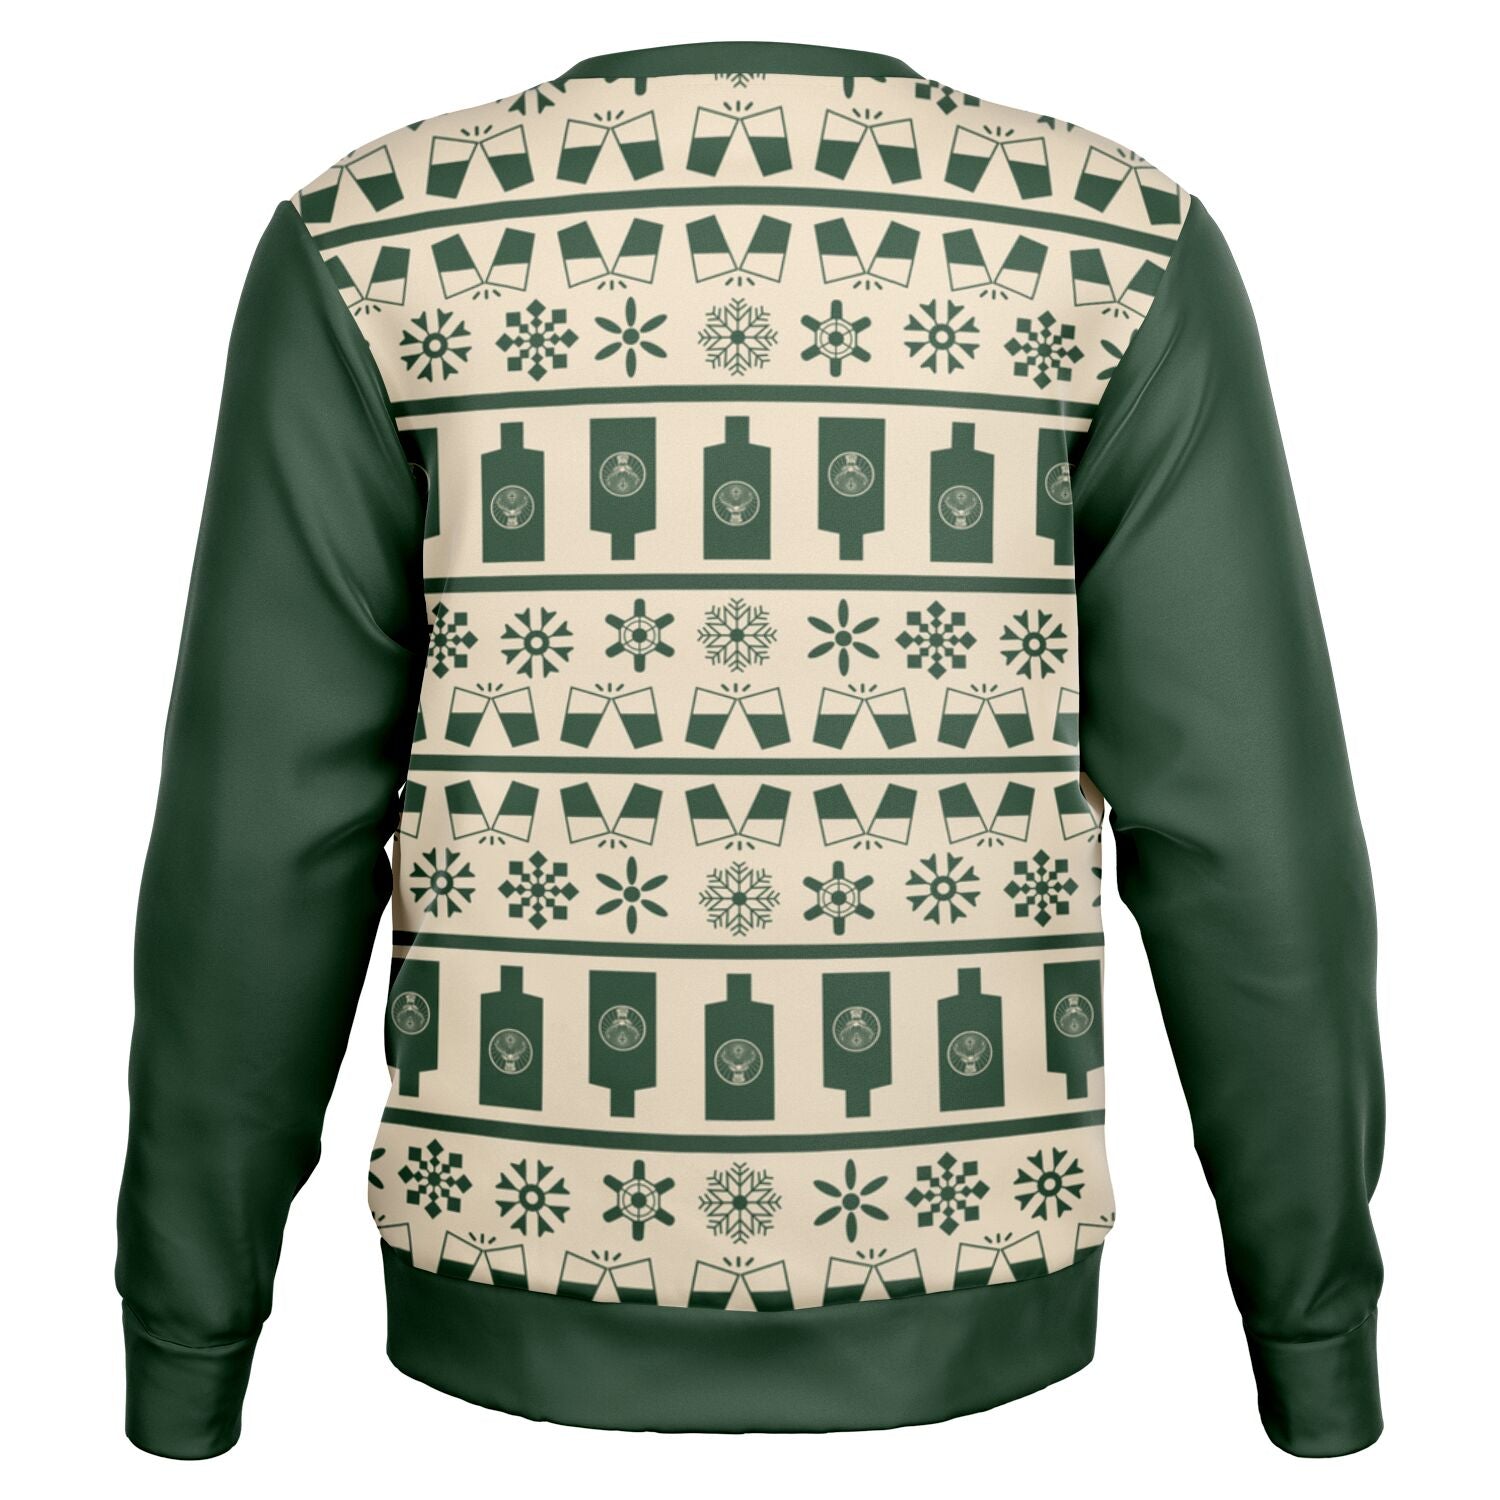 Arnold Jorts 'n Jager Ugly Christmas Sweater for Skiers